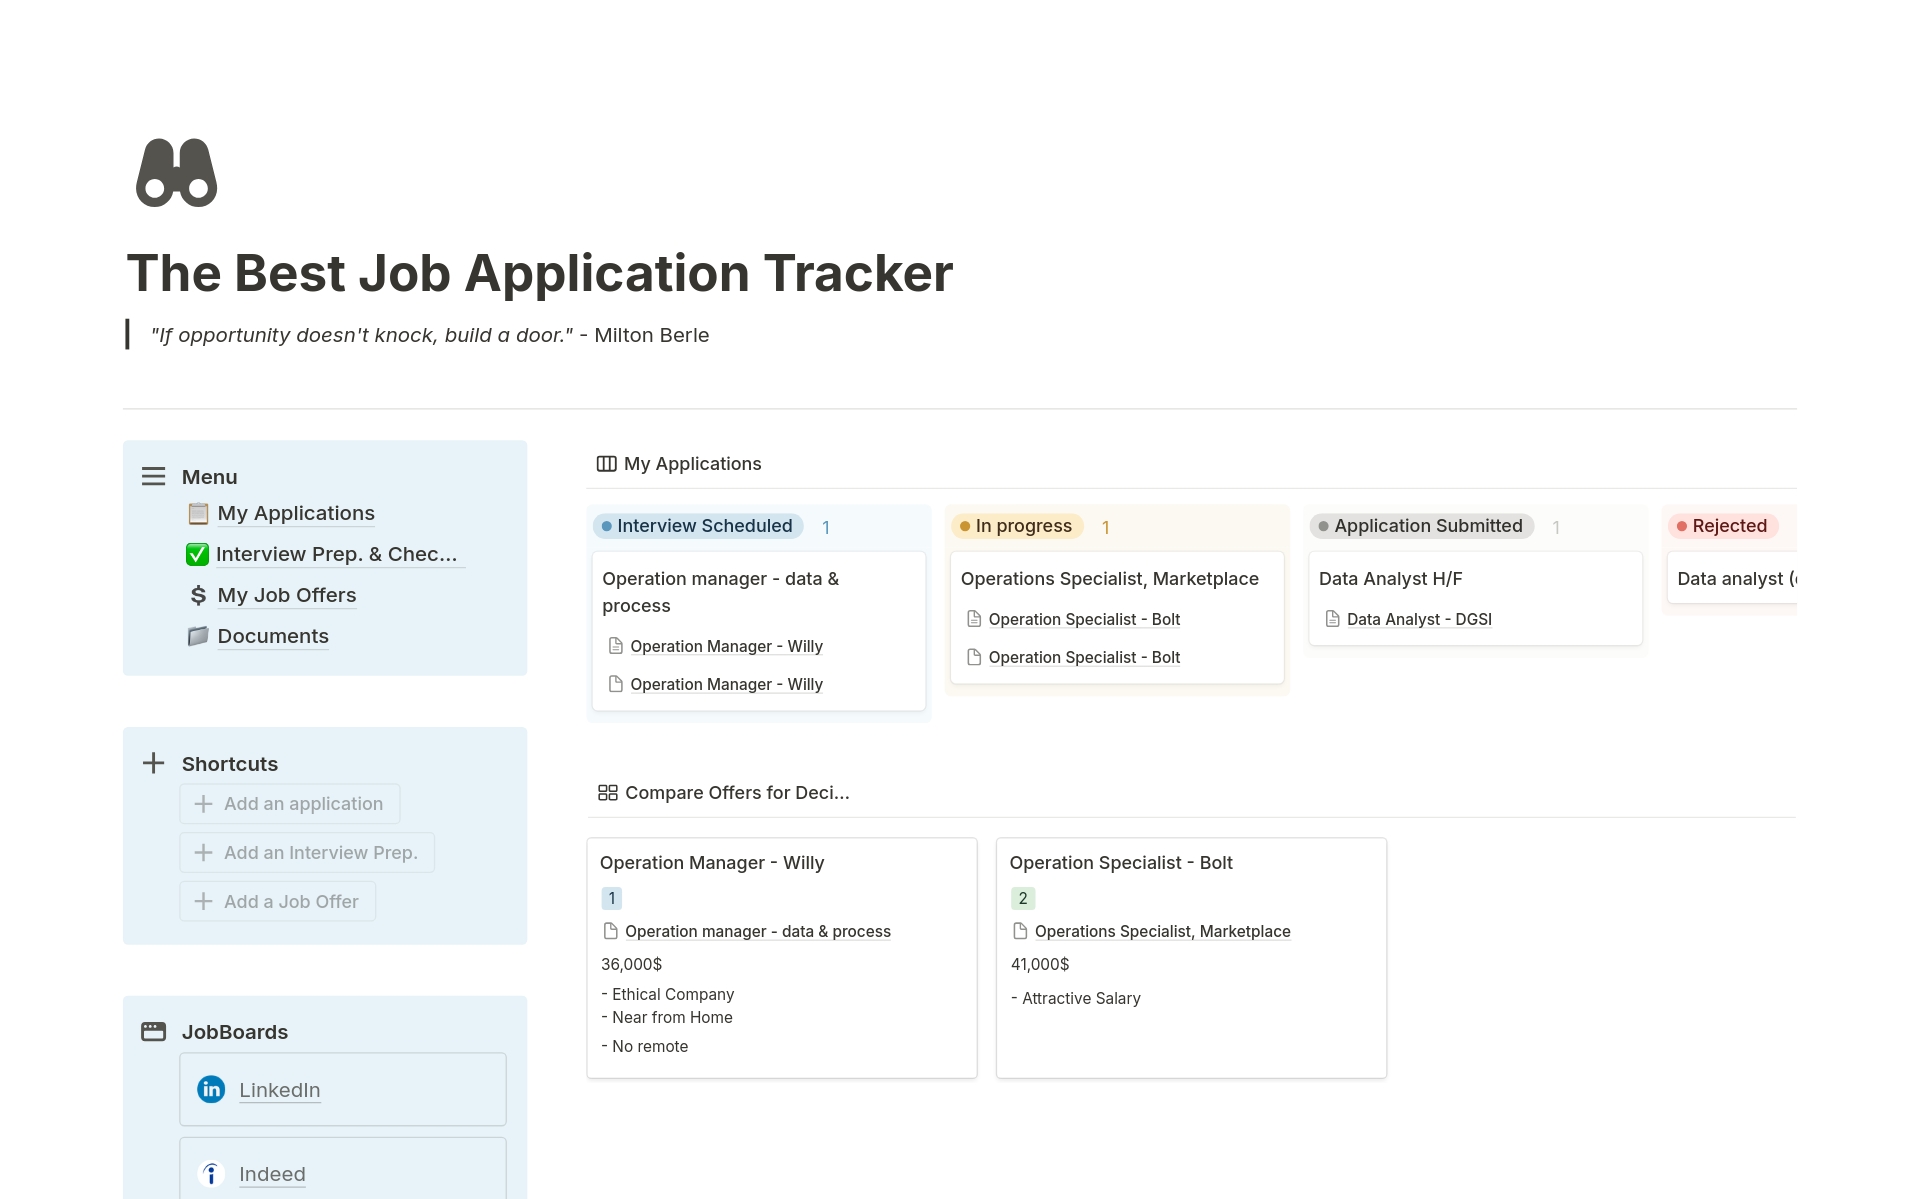 Master your job search with The Job Search Tracker for Notion! Effortlessly organize applications, prepare for interviews, and compare job offers with ease. Tailored checklists and navigation ensure a smooth process.
Start your journey to career success today!